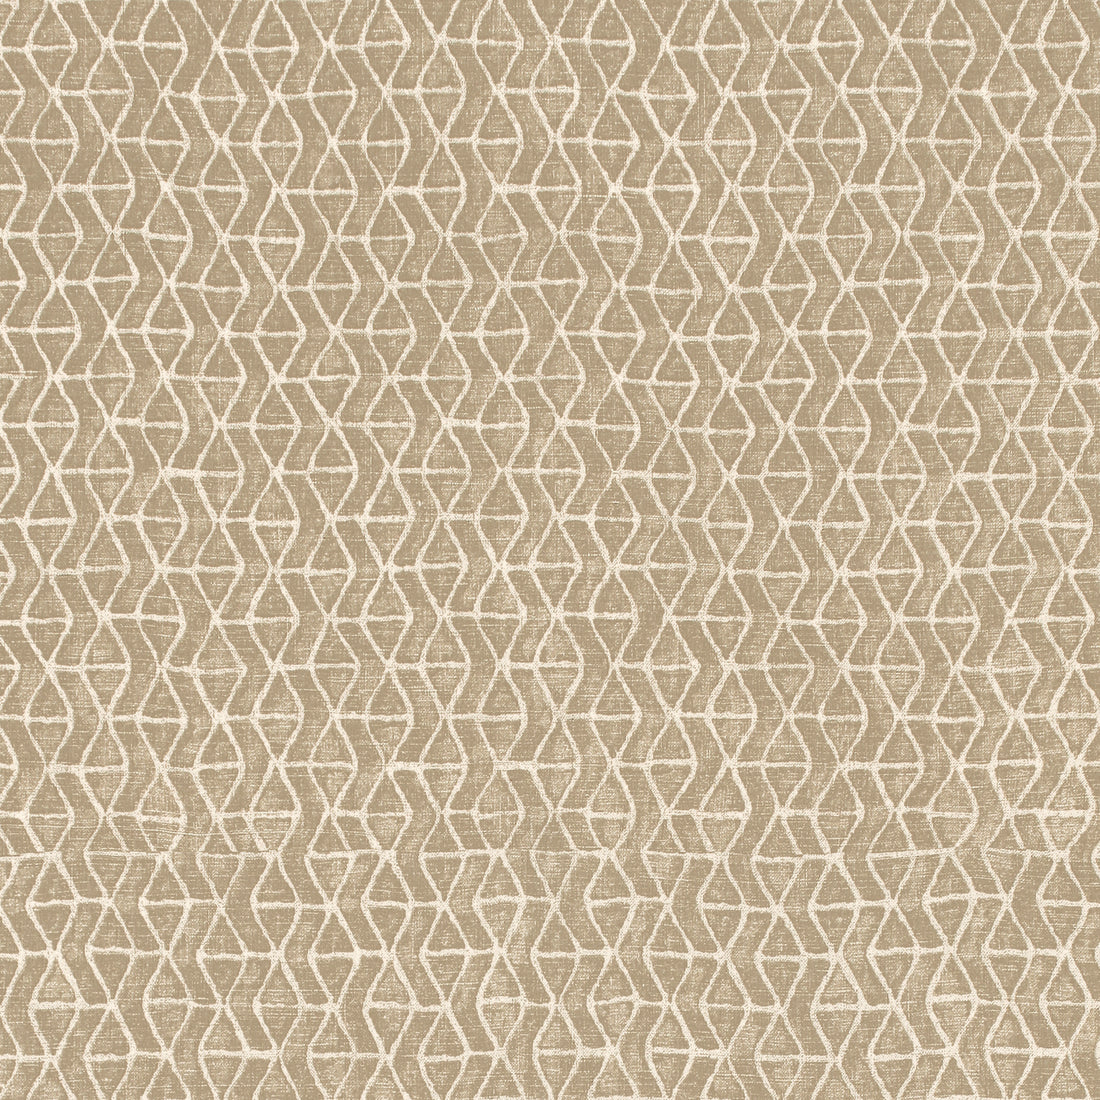 Stony Brook fabric in beige color - pattern number F942003 - by Thibaut in the Sojourn collection